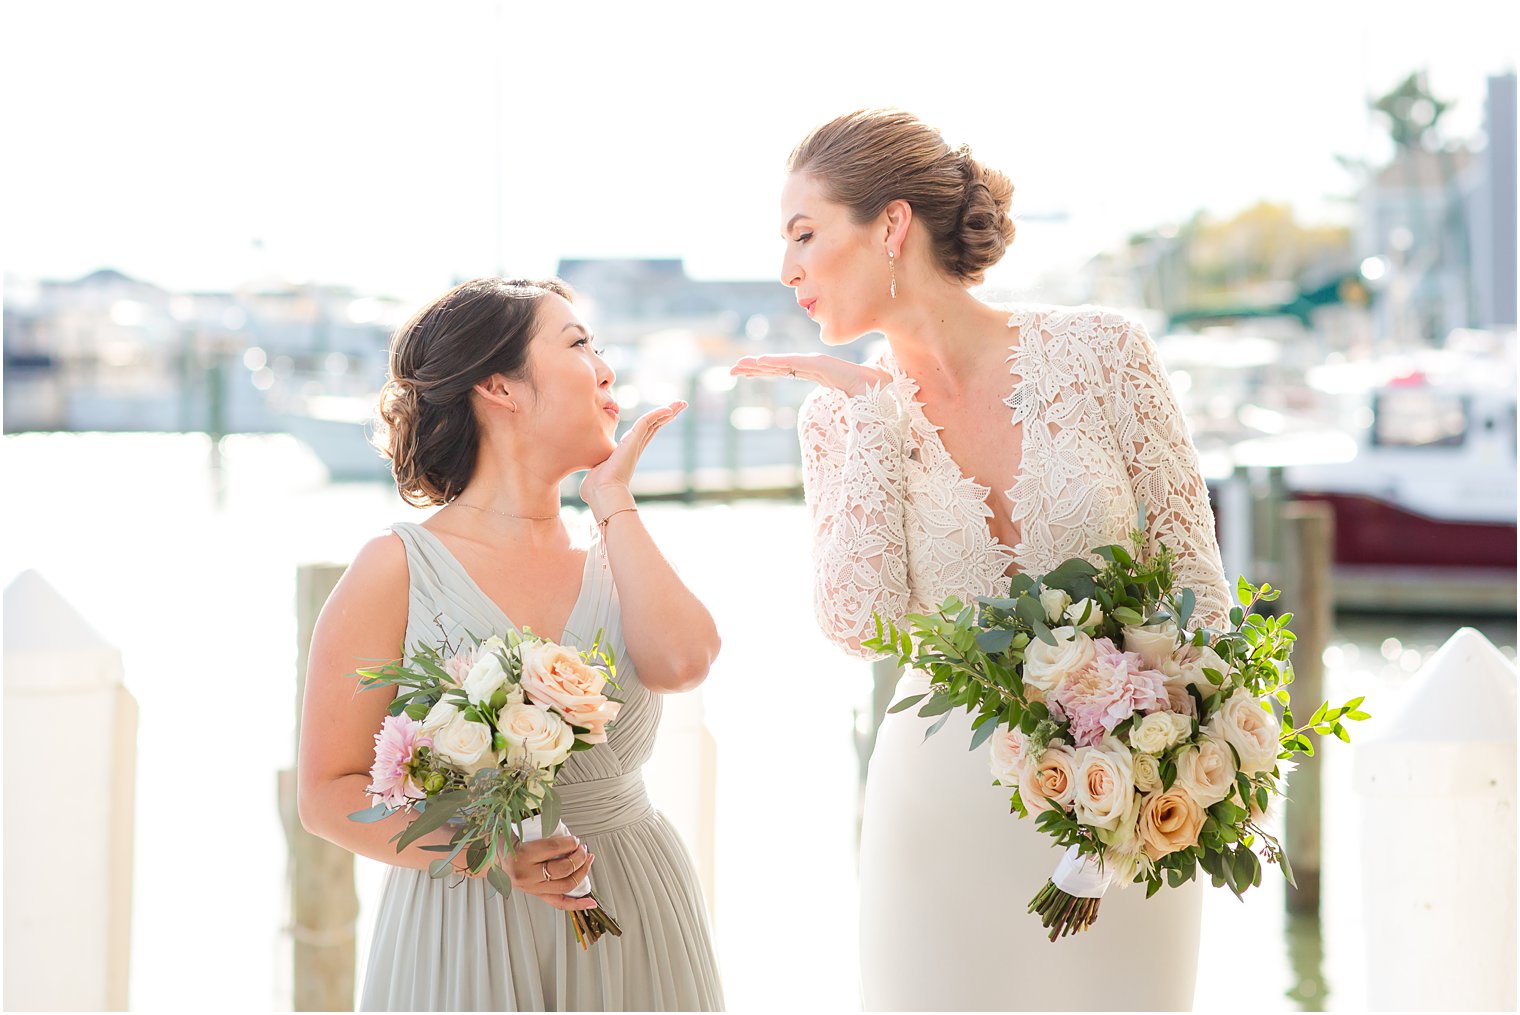 Bride and bridesmaid blowing kisses at each other